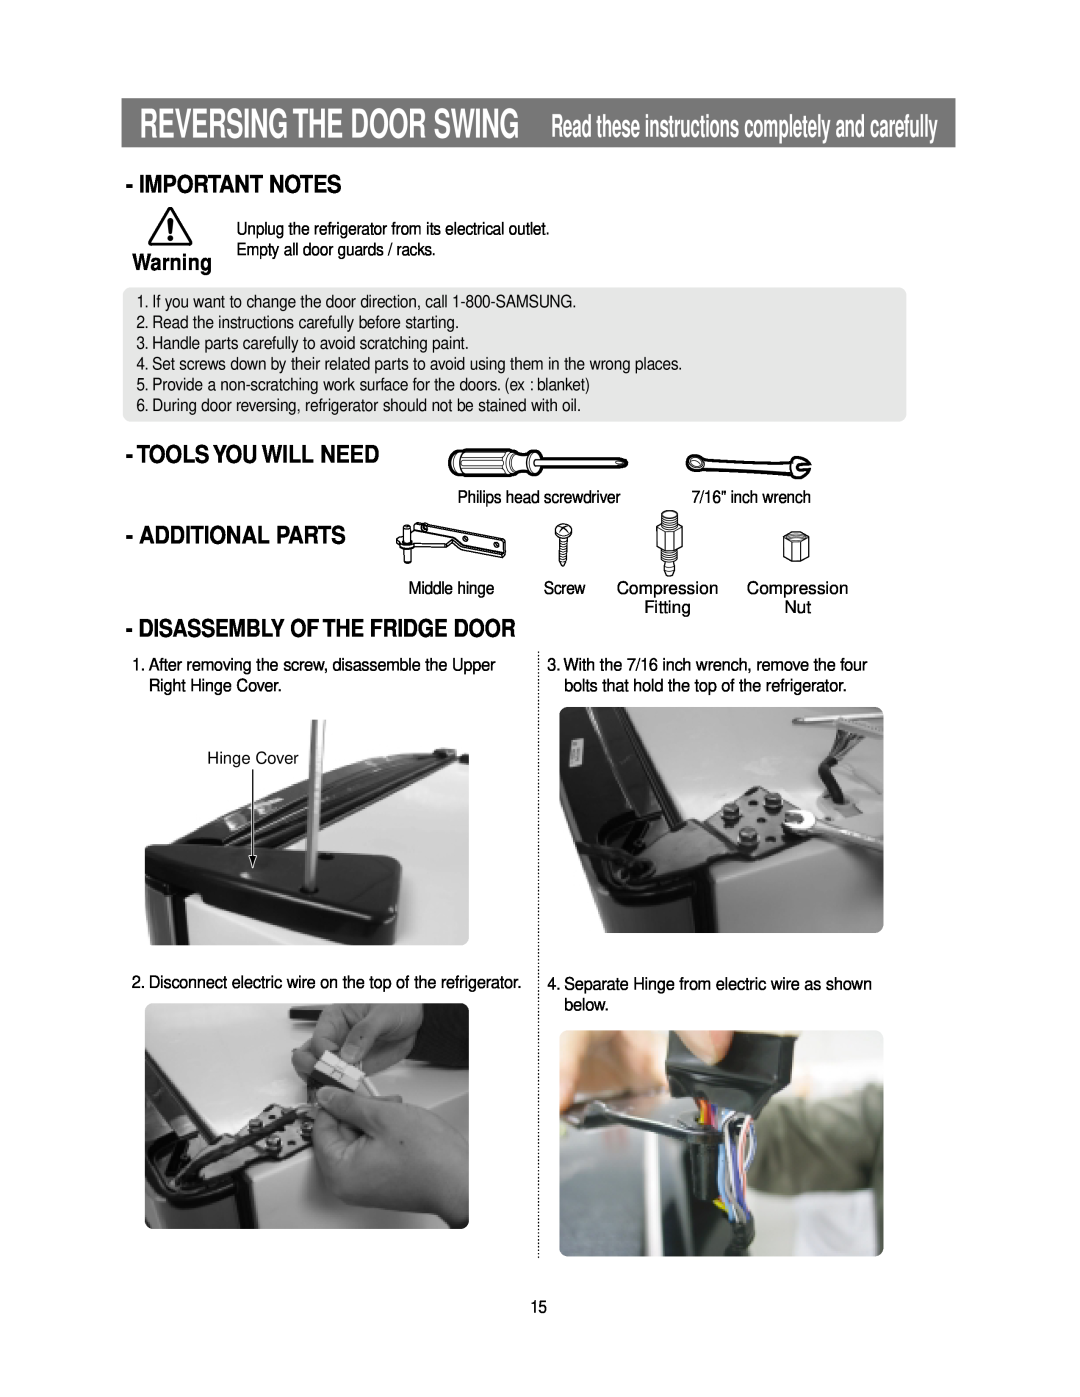 Samsung RB195LA, RB215LA Important Notes, Tools You Will Need, Additional Parts, Disassembly Of The Fridge Door, Fitting 